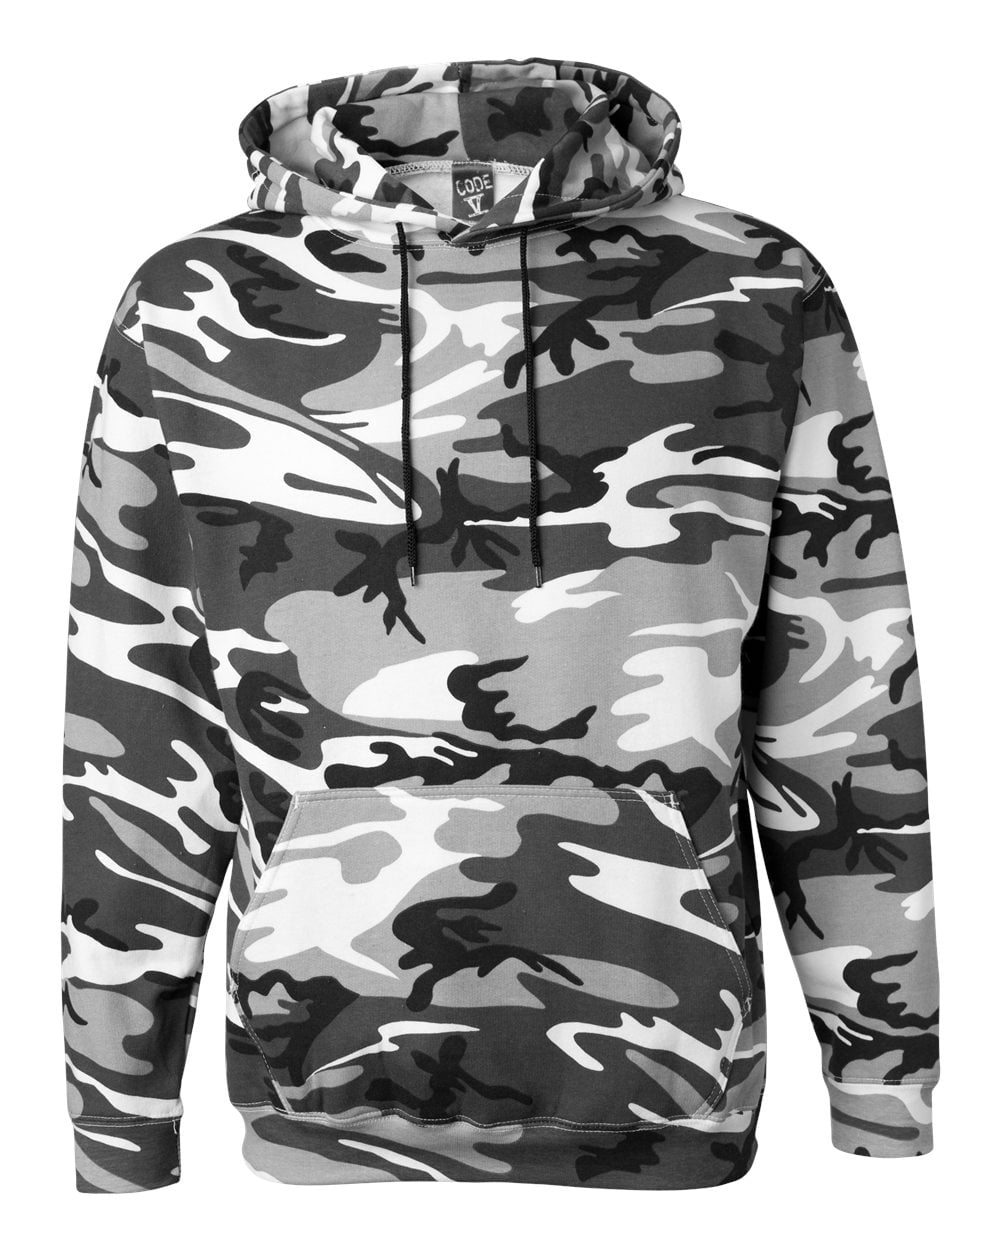 Code Five Mens Camouflage Fleece Long Sleeve Pullover Hooded Sweatshirt with Drawstring 